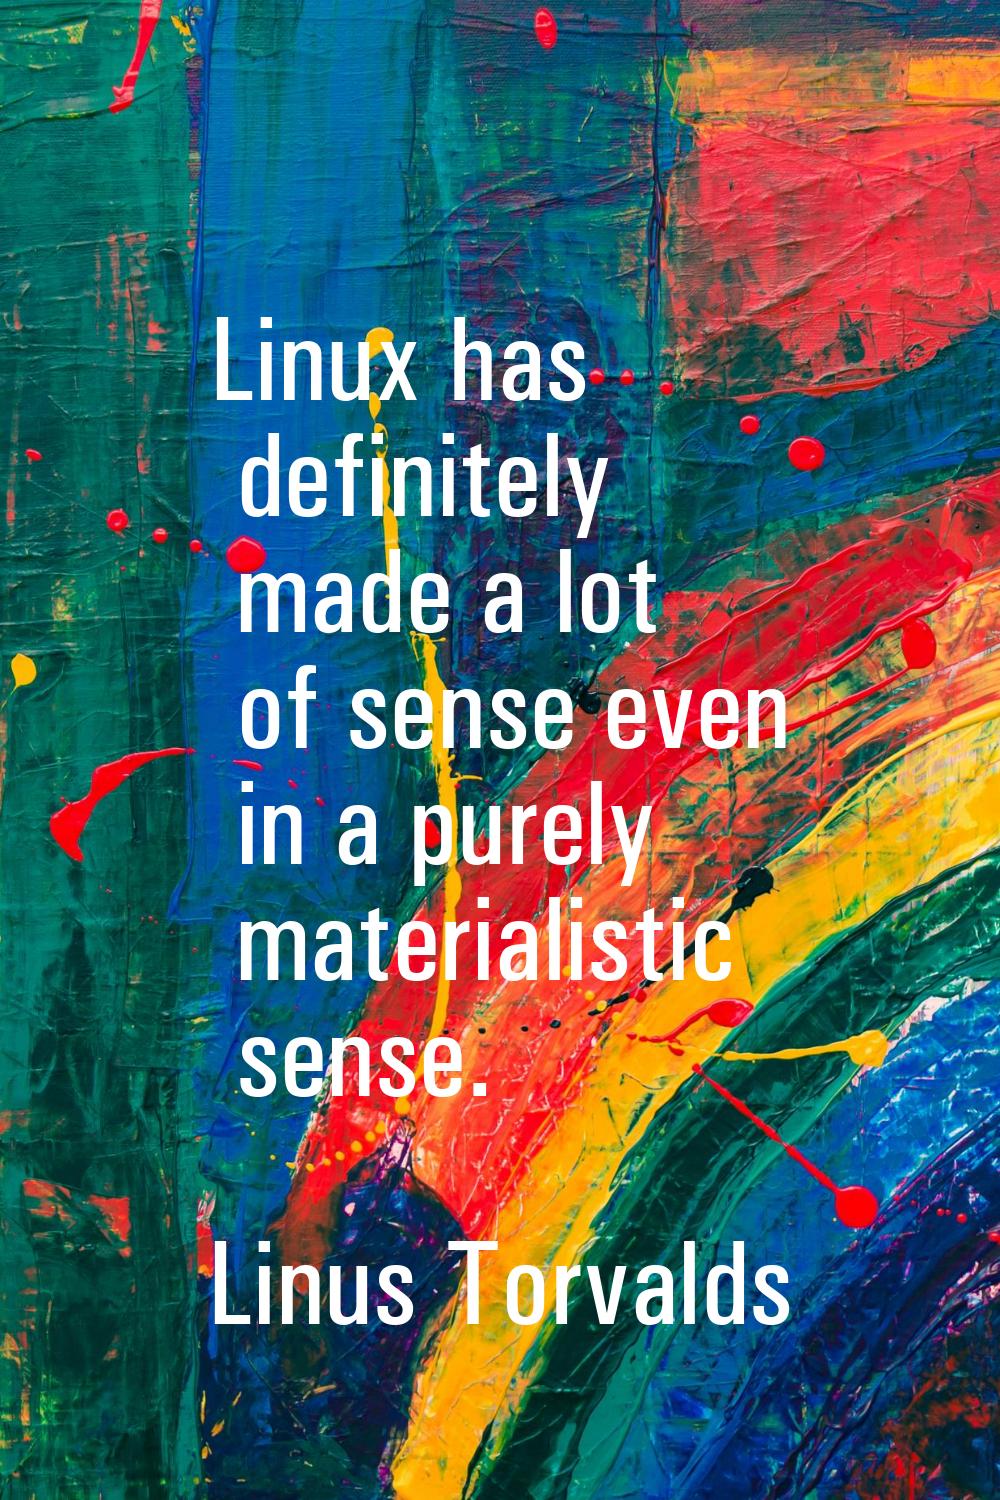 Linux has definitely made a lot of sense even in a purely materialistic sense.